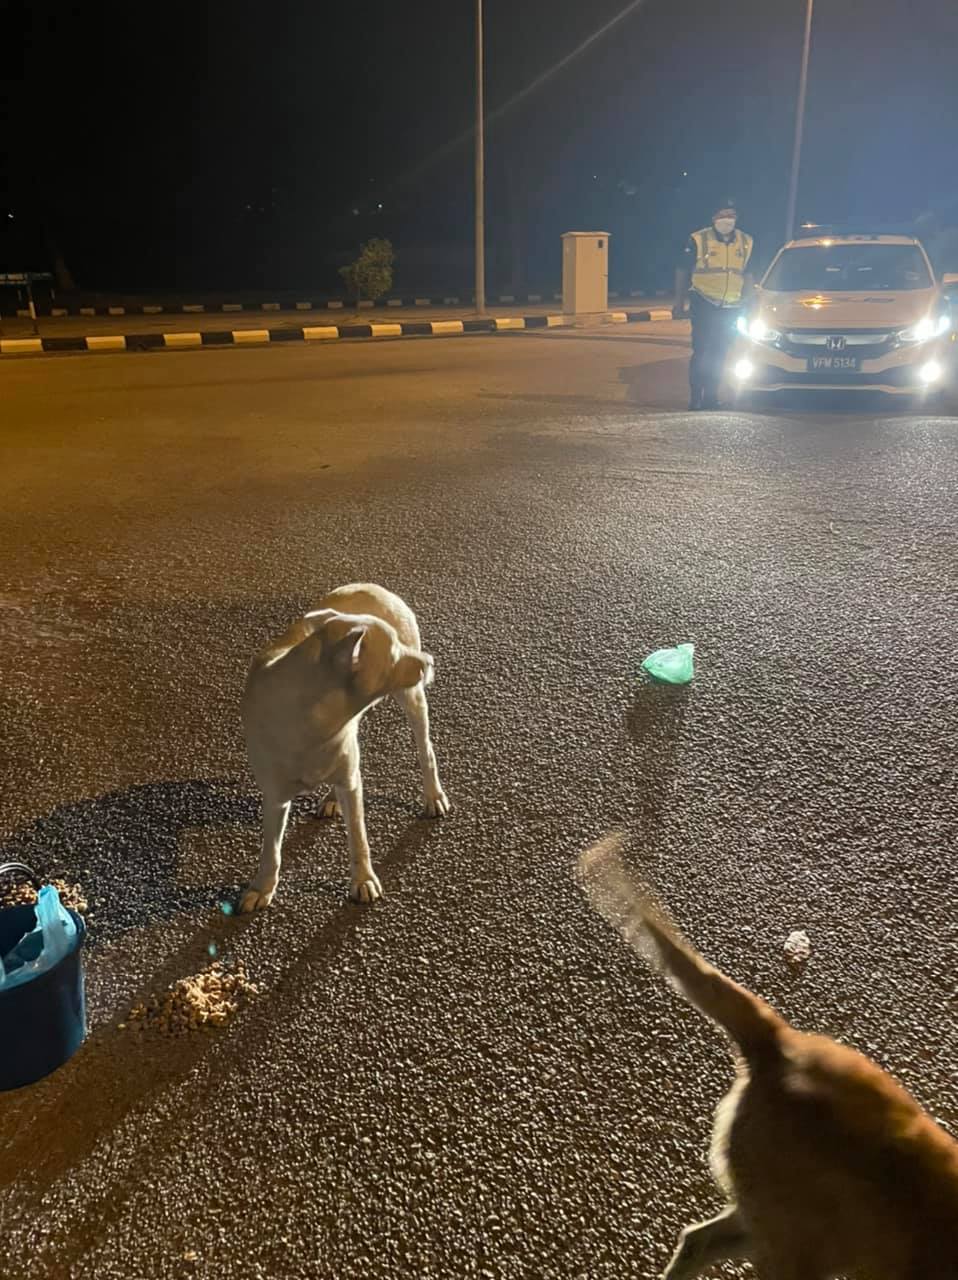 Woman feeding stray dogs gets the attention of police who teman her - feed